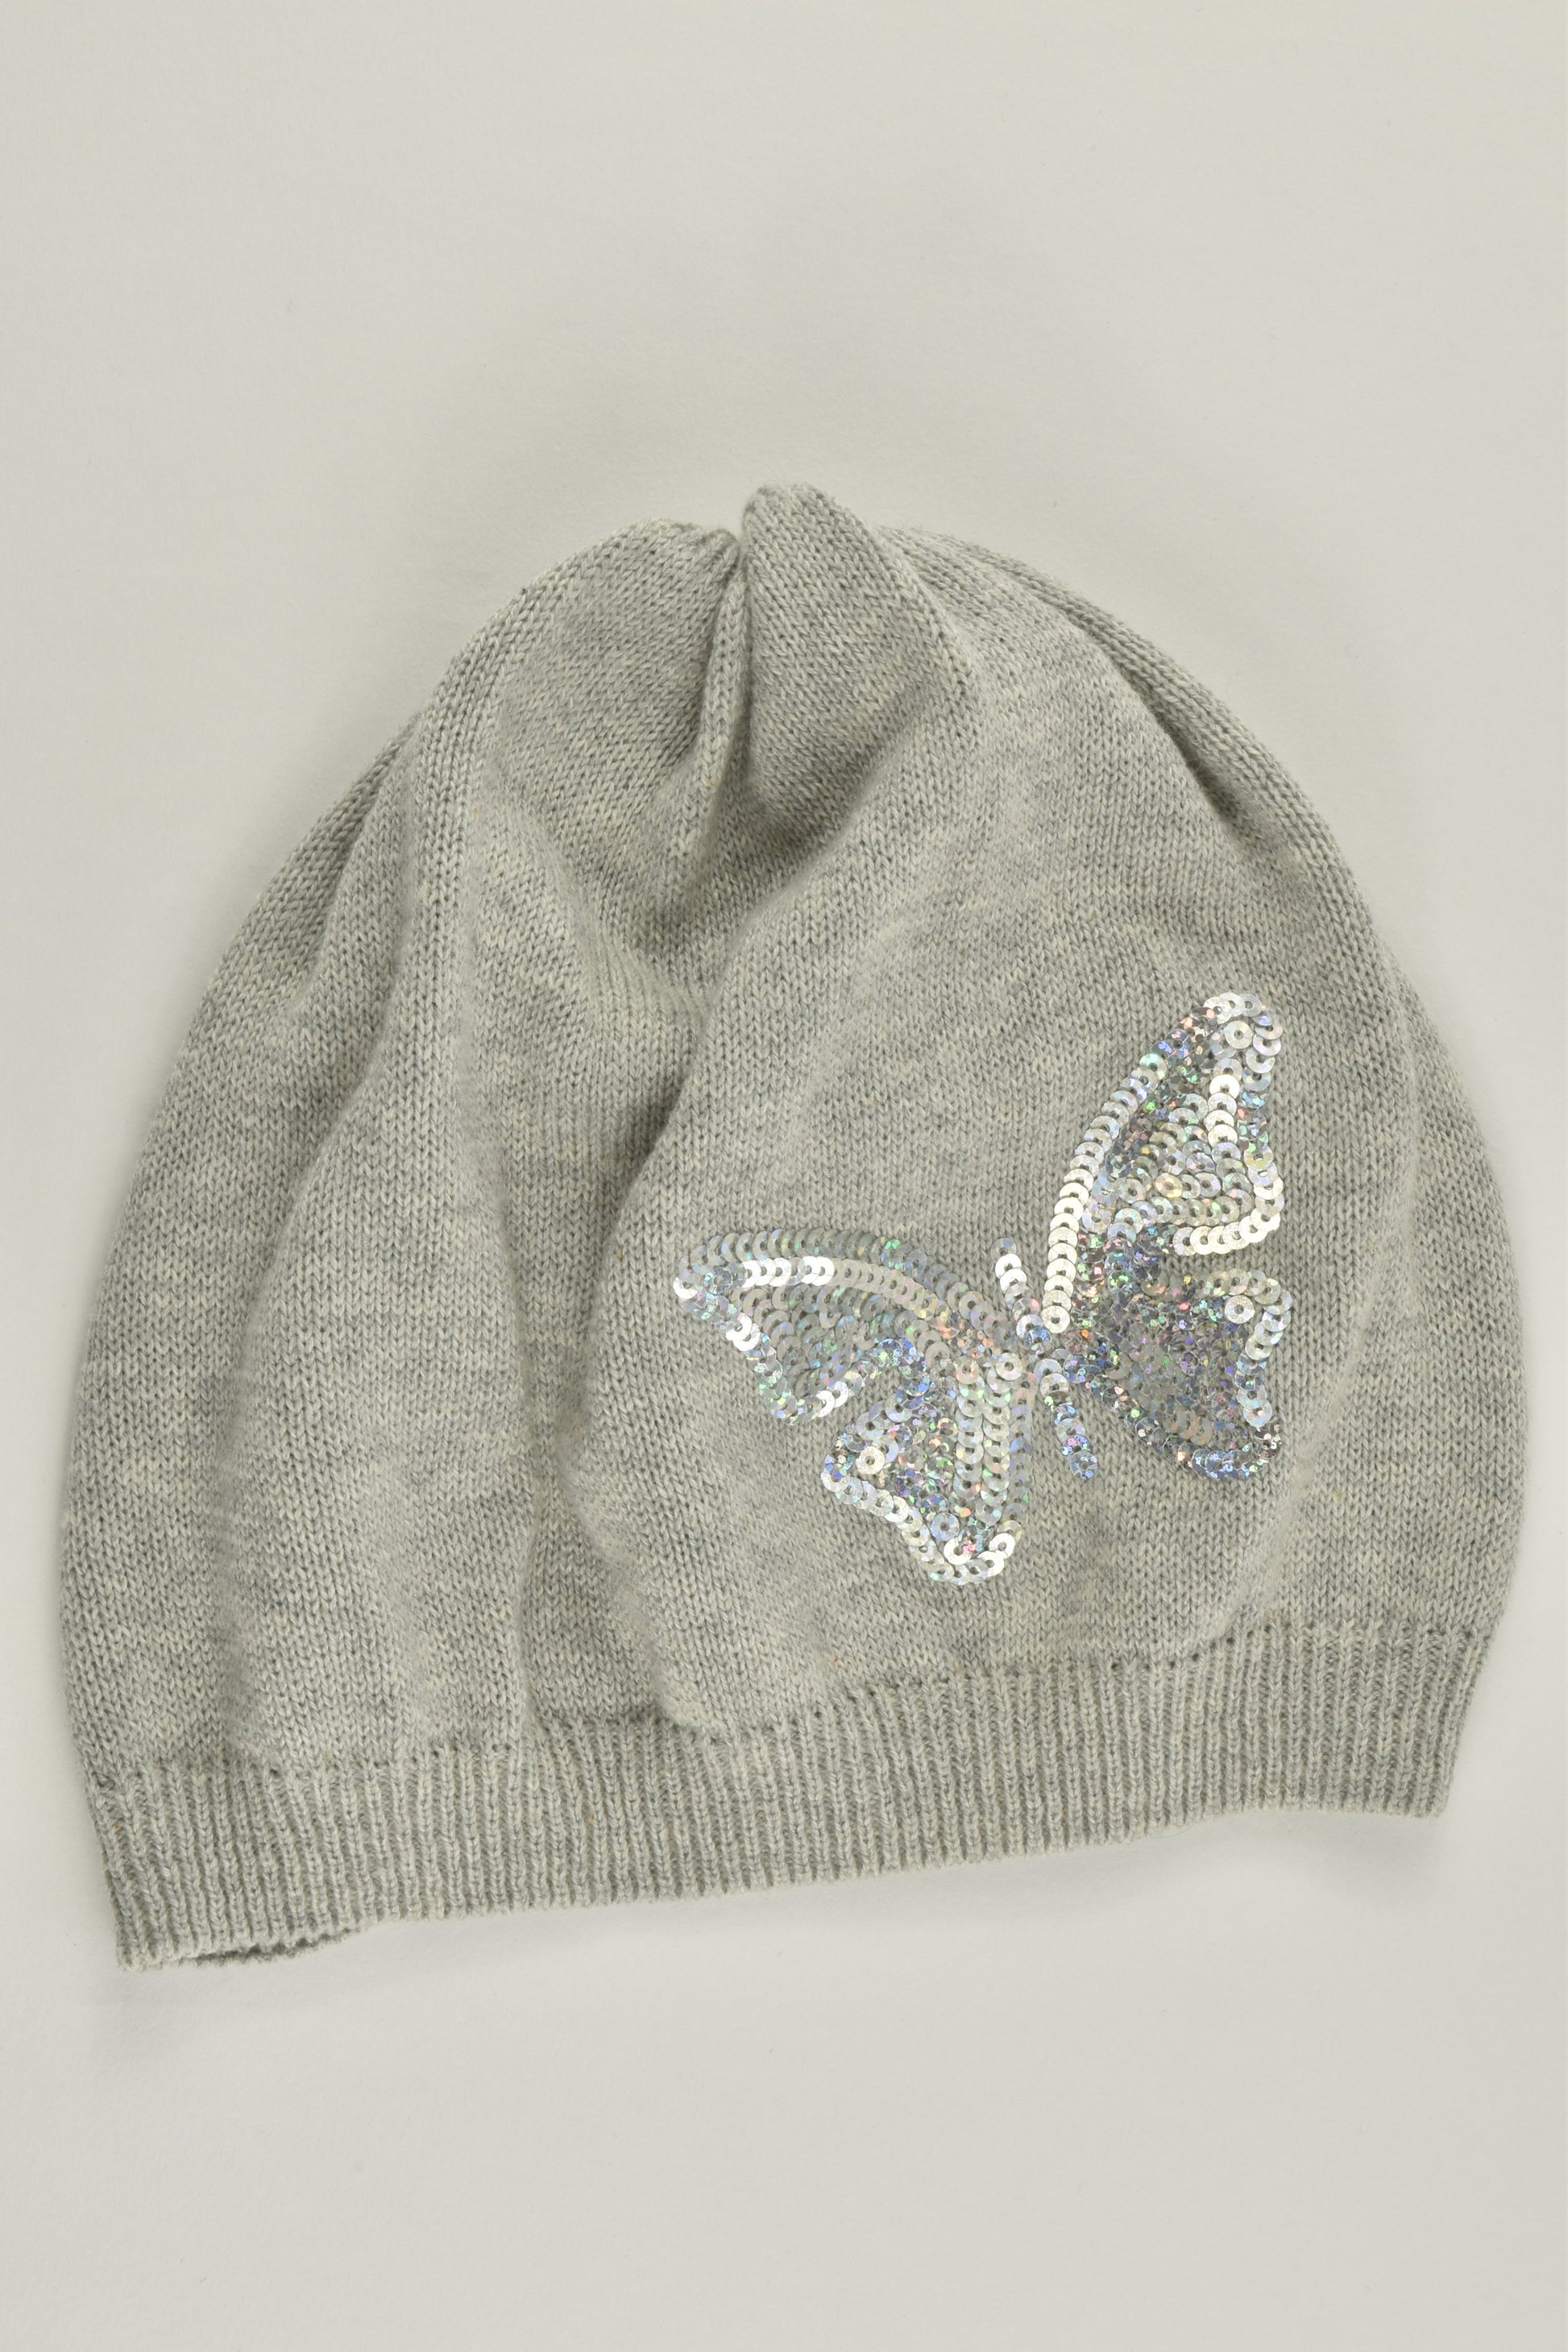 NEW H&M Size 5-8 (110/128 cm) Butterfly Beanie